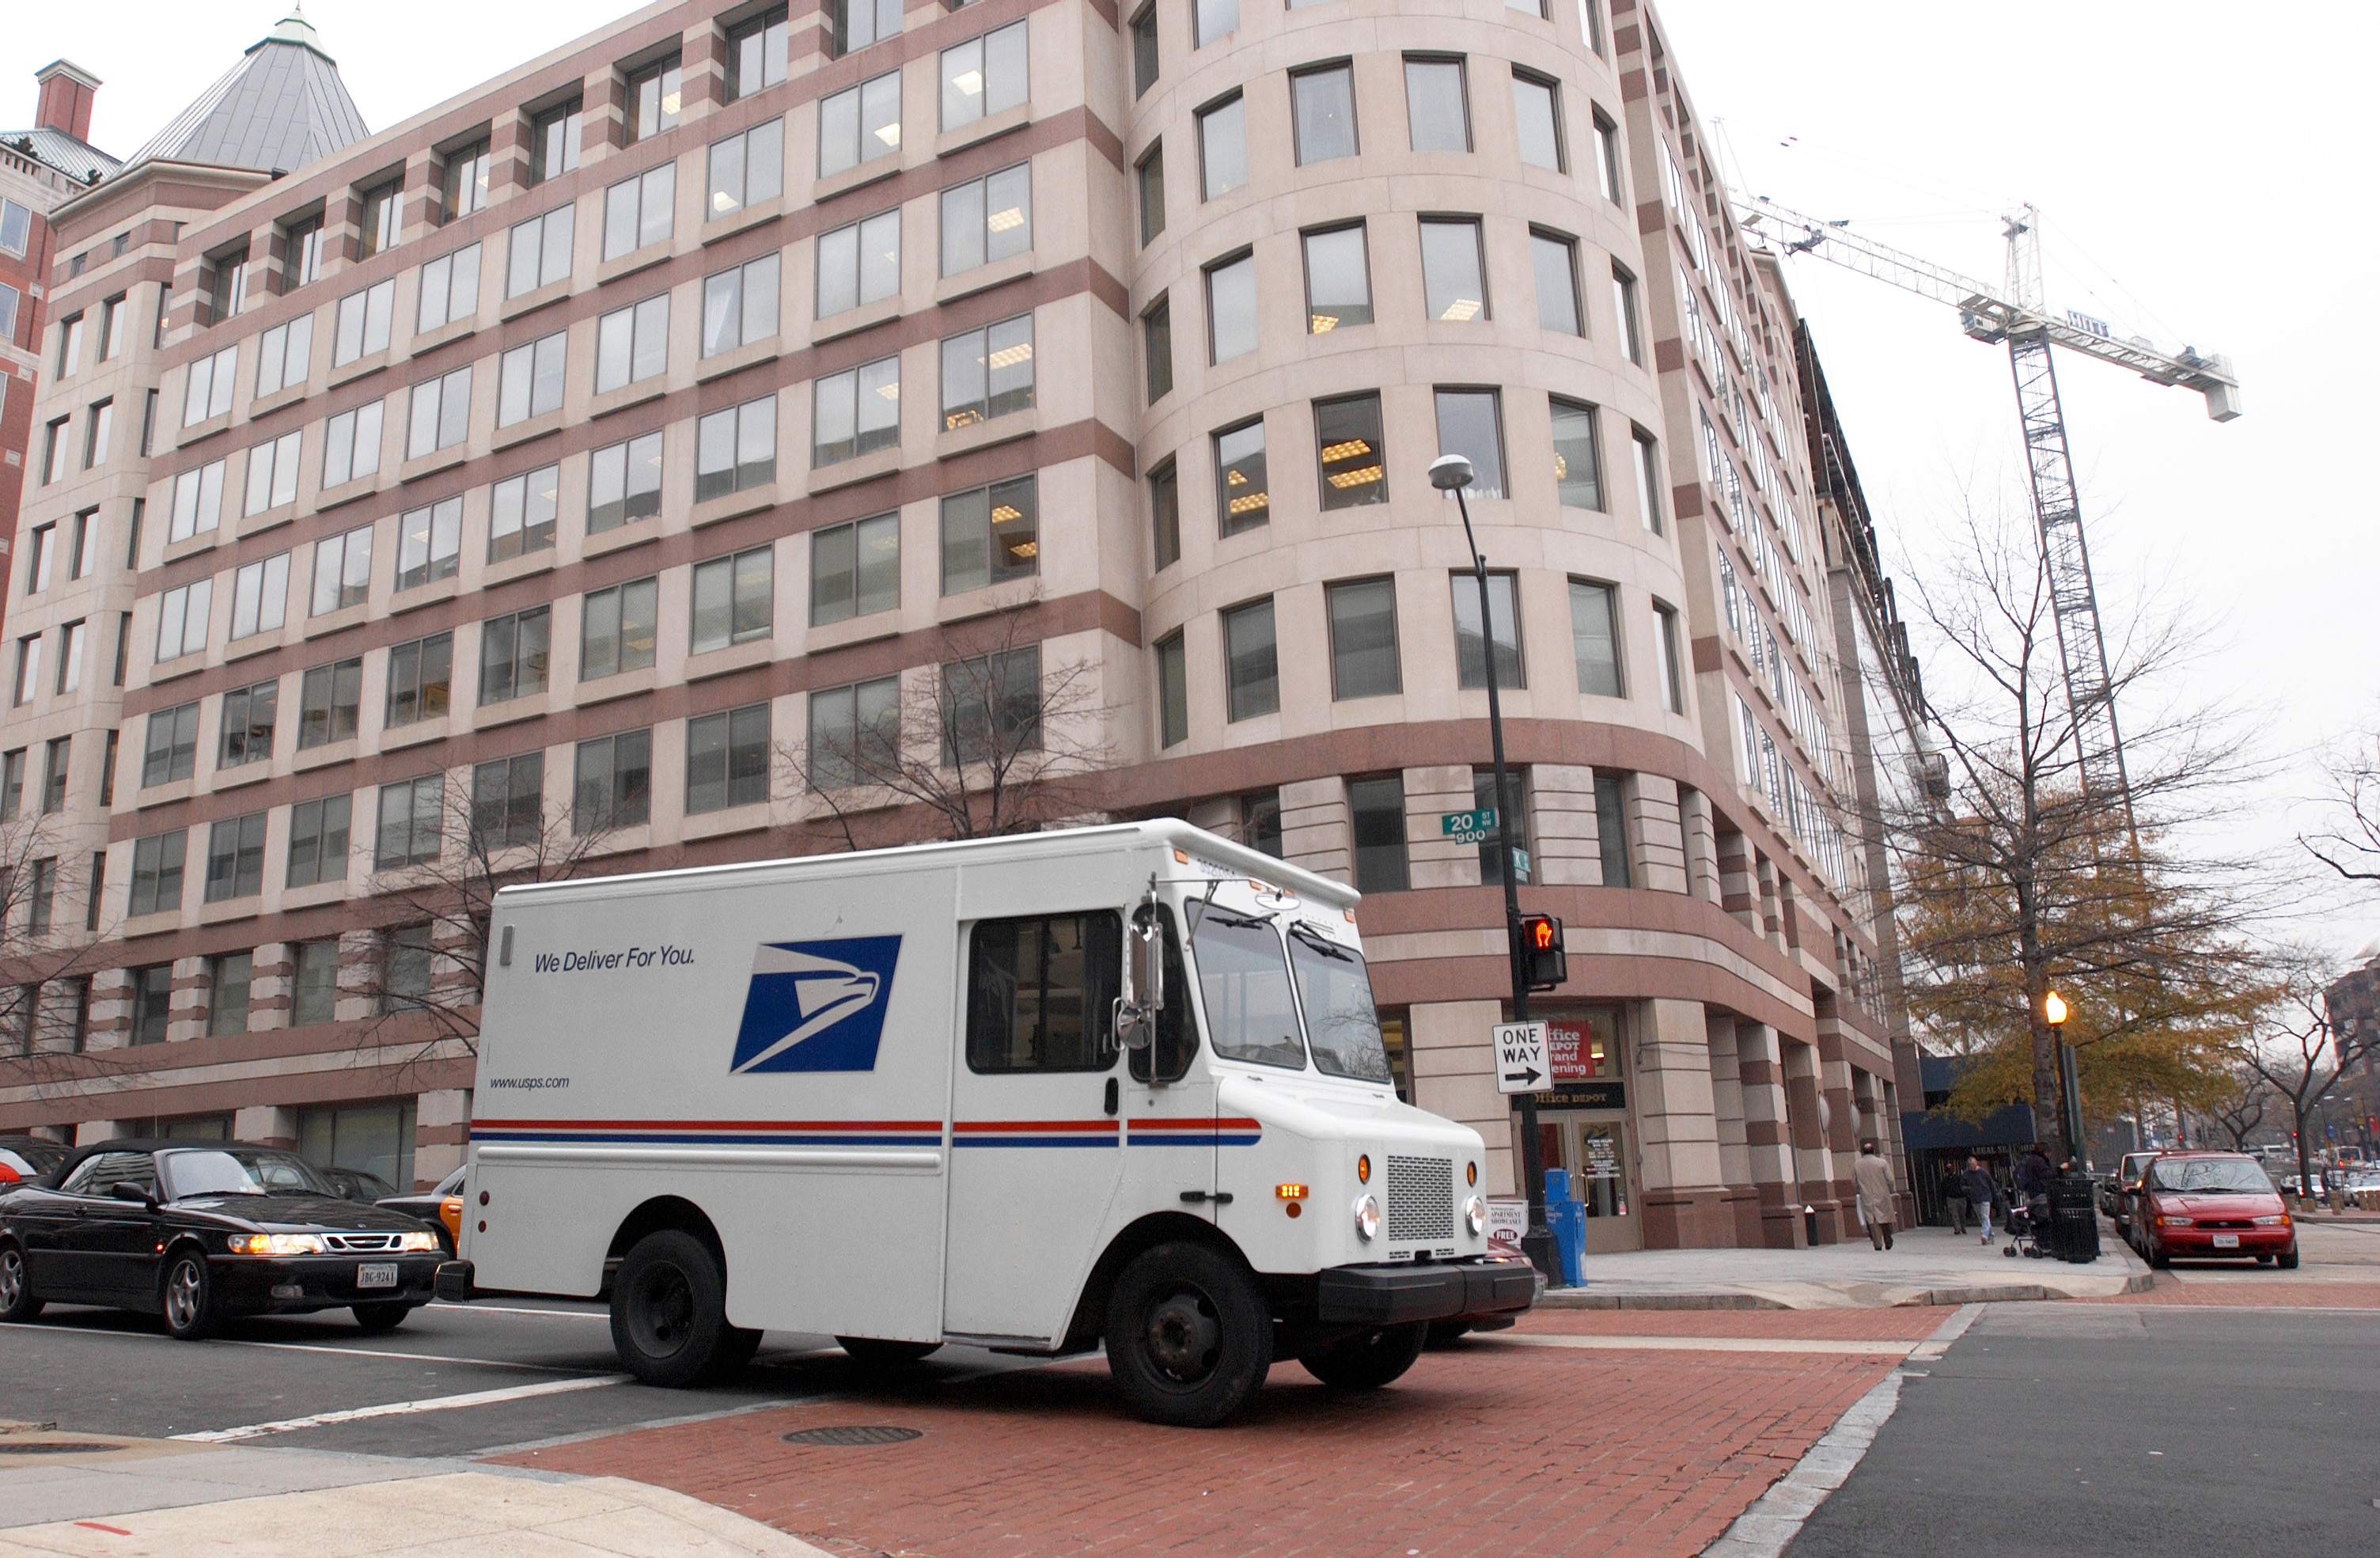 What happens if you miss a delivery from the U.S. Postal Service?